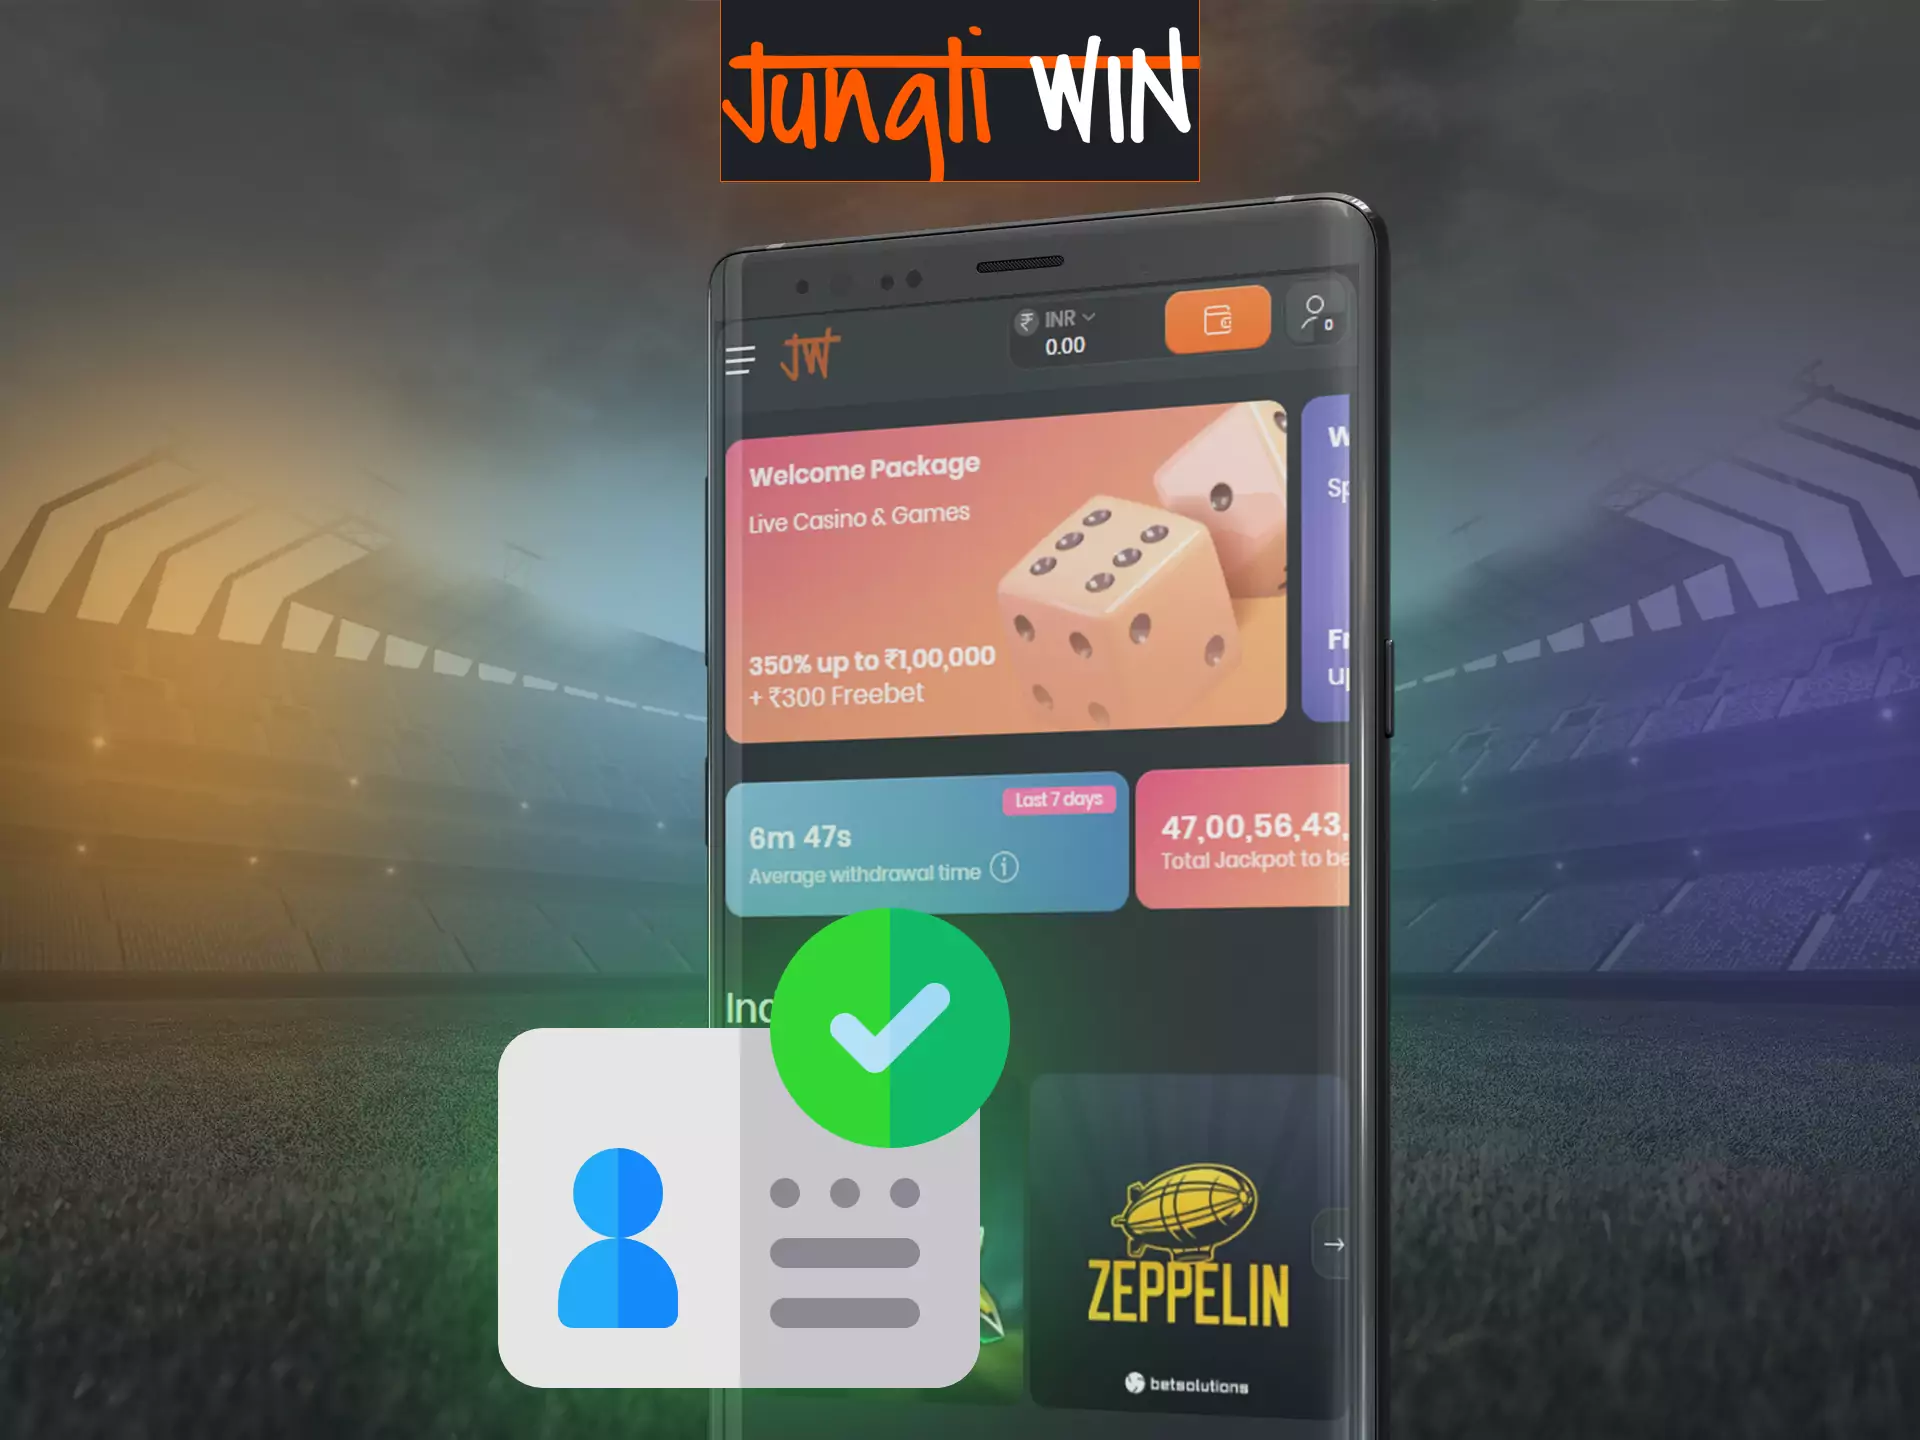 Confirm your identity in the account of the Jungliwin application and get access to all the functions of the service.